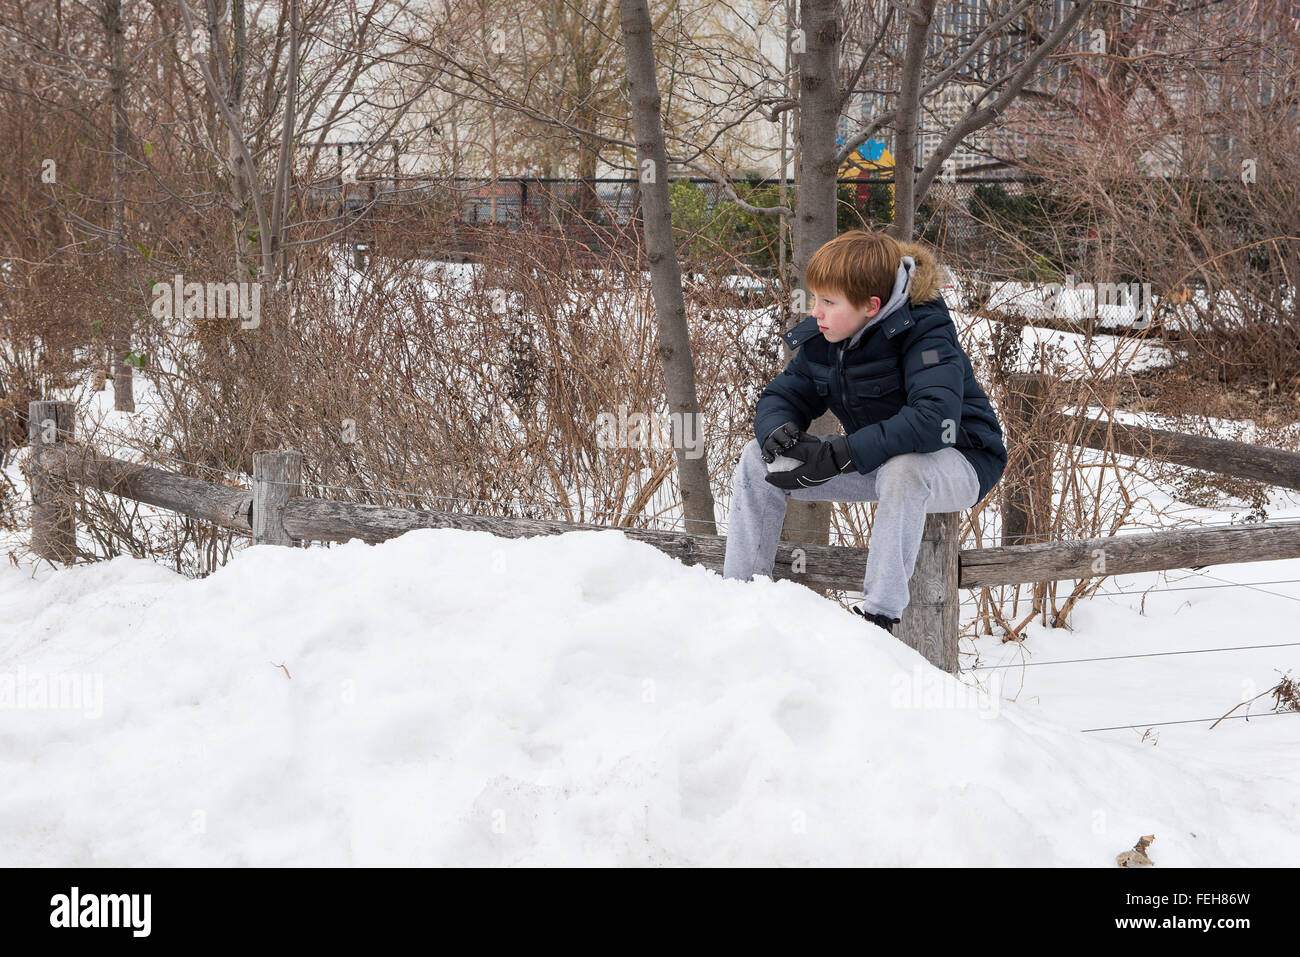 Young boy sitting on a wooden fence holding a snowball Stock Photo